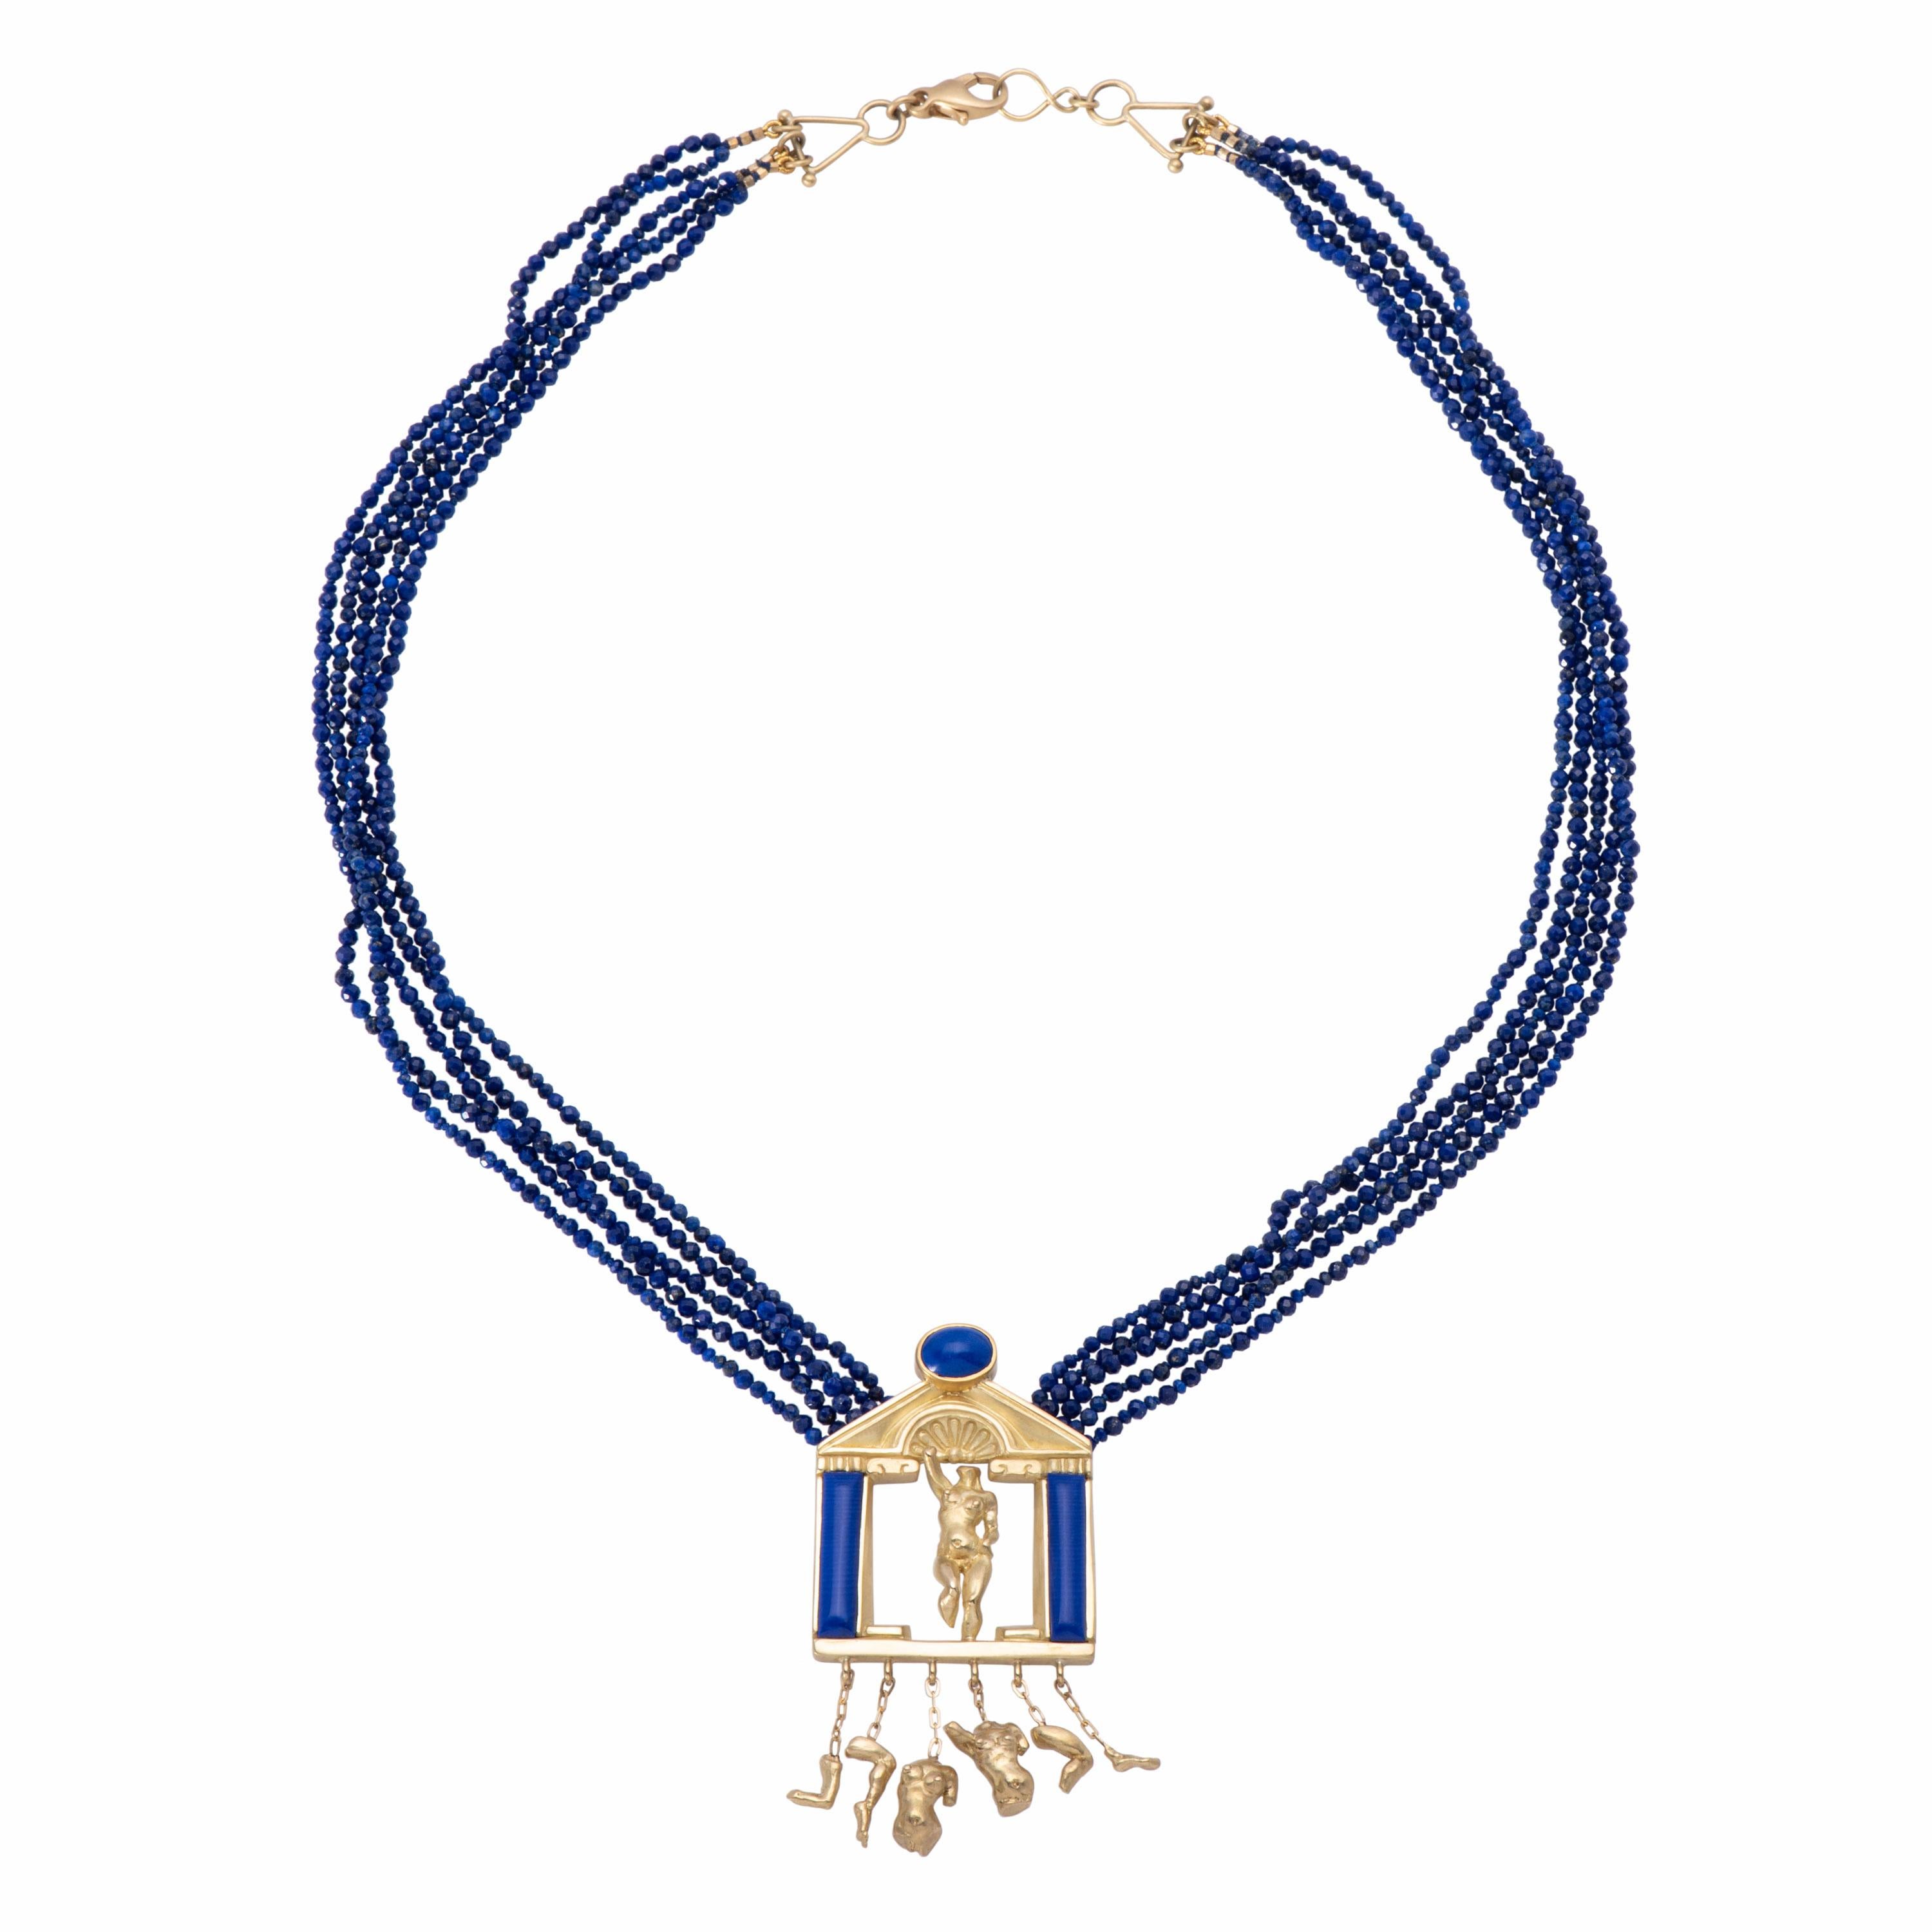 Temple to Venus Pendant is an ode to the goddess in 18k gold and blue lapis. A classic Roman temple in gold displays a statuary Venus, one arm raised and a knee lifted in movement. Below, broken pieces of classic Roman statuary dangle from gold